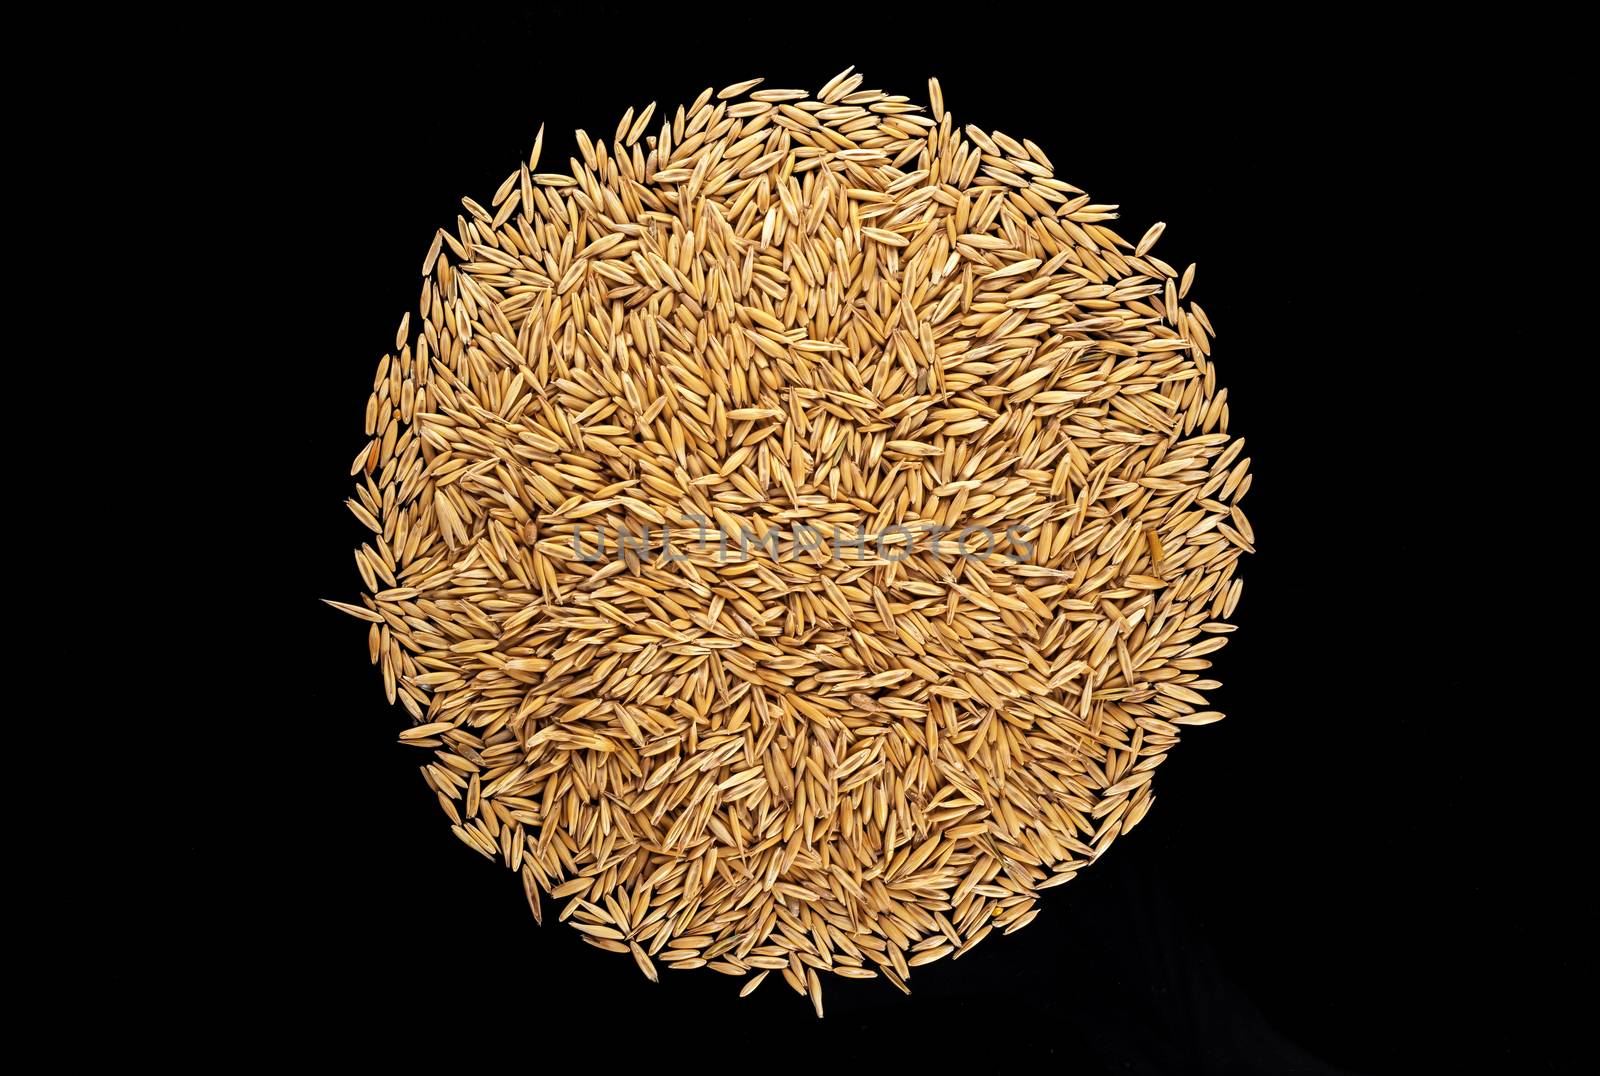 Pile of oat grains on black background, top view by xamtiw